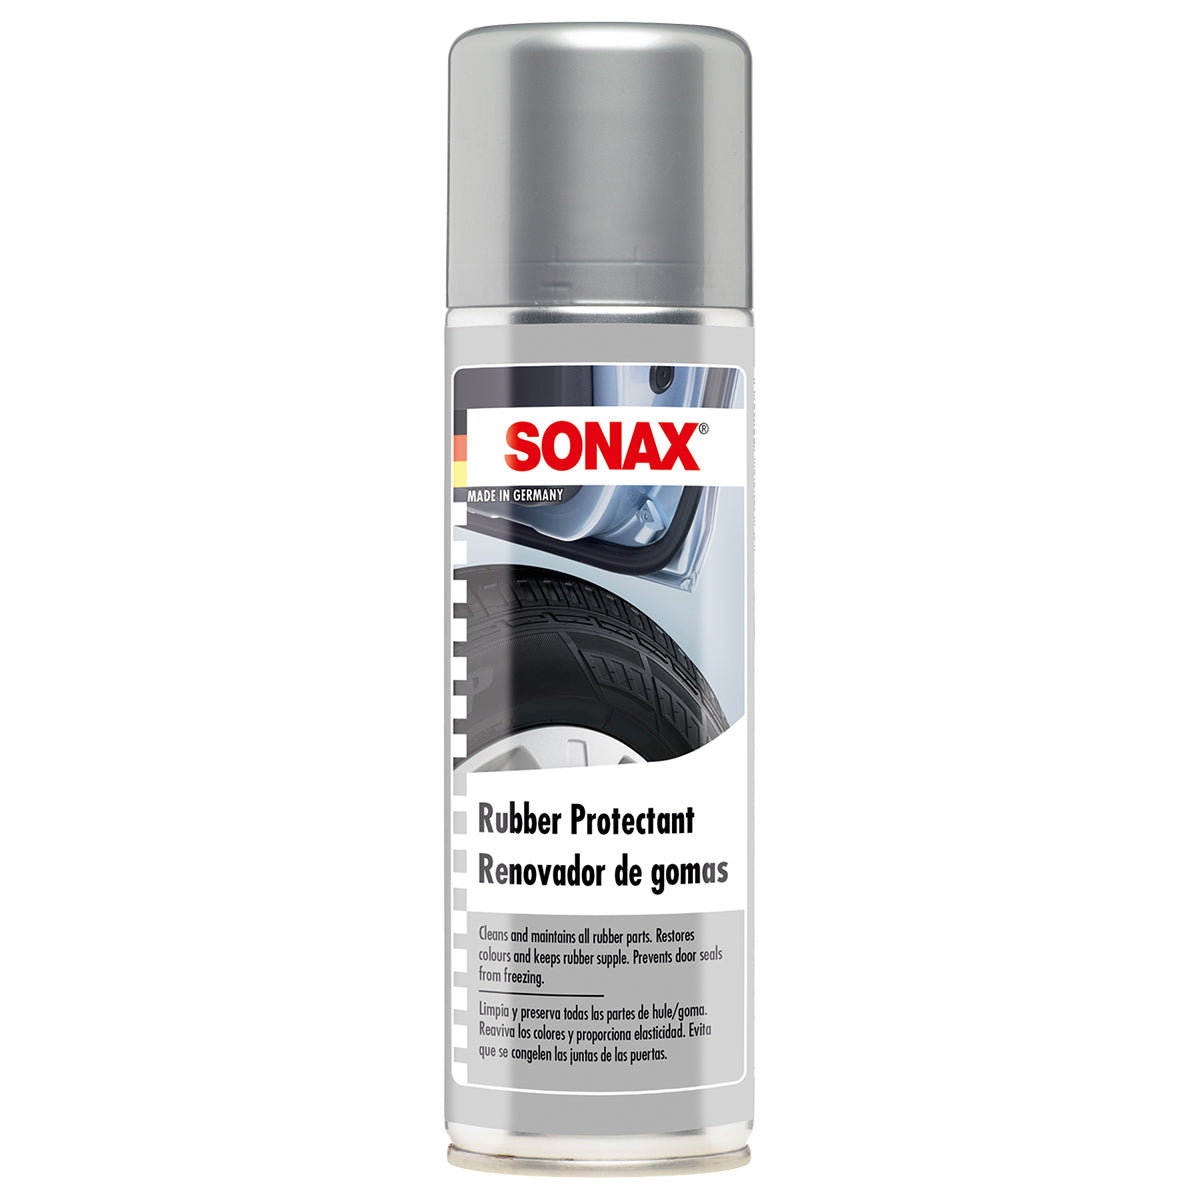 SONAX Rubber Seals Protectant (2 sizes)